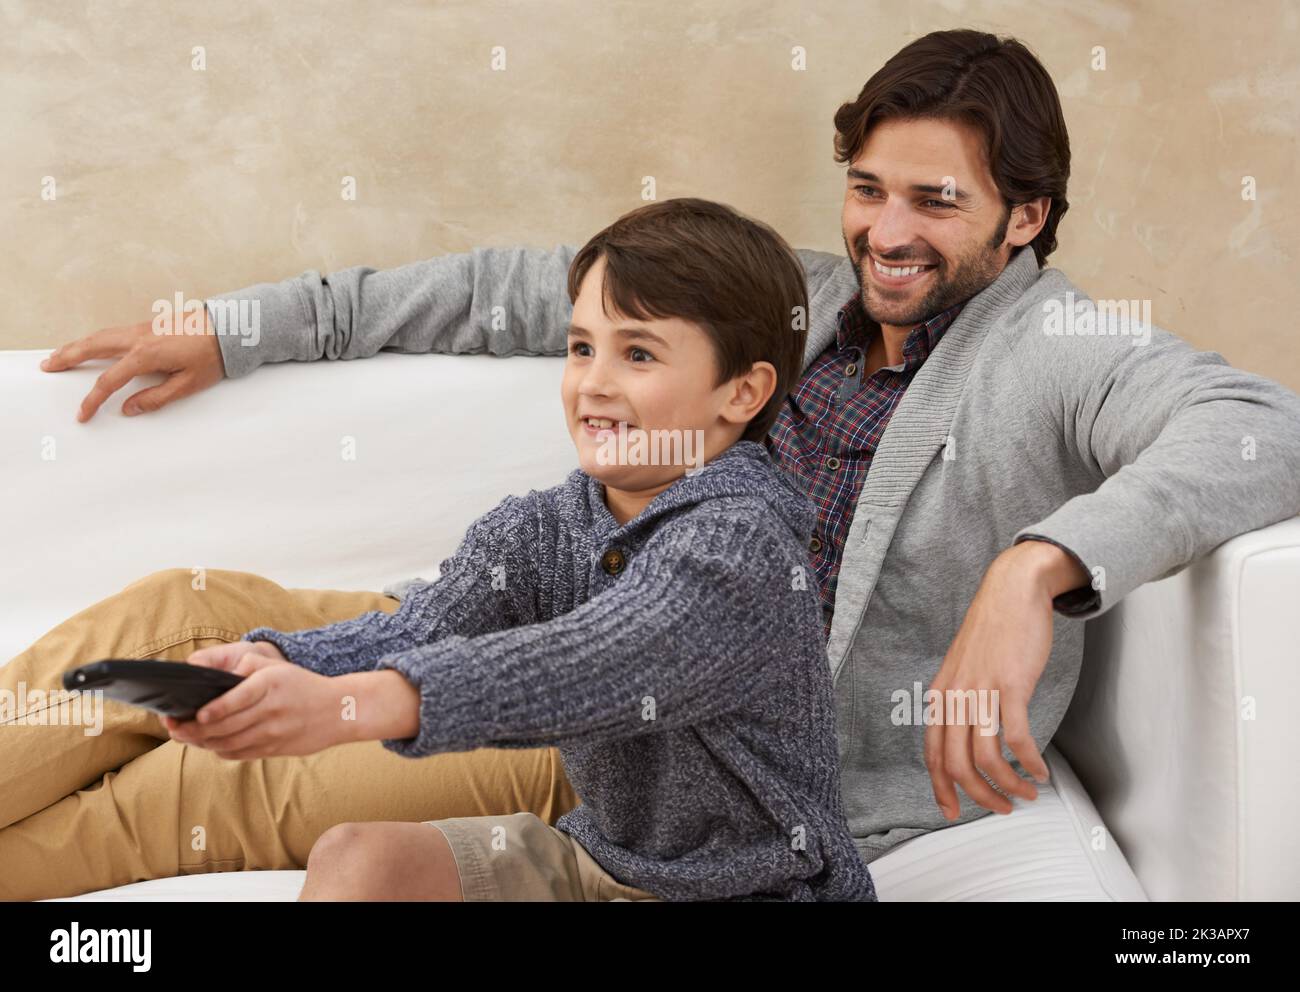 I get to choose the channel this time. father and son enjoying some quality time together. Stock Photo